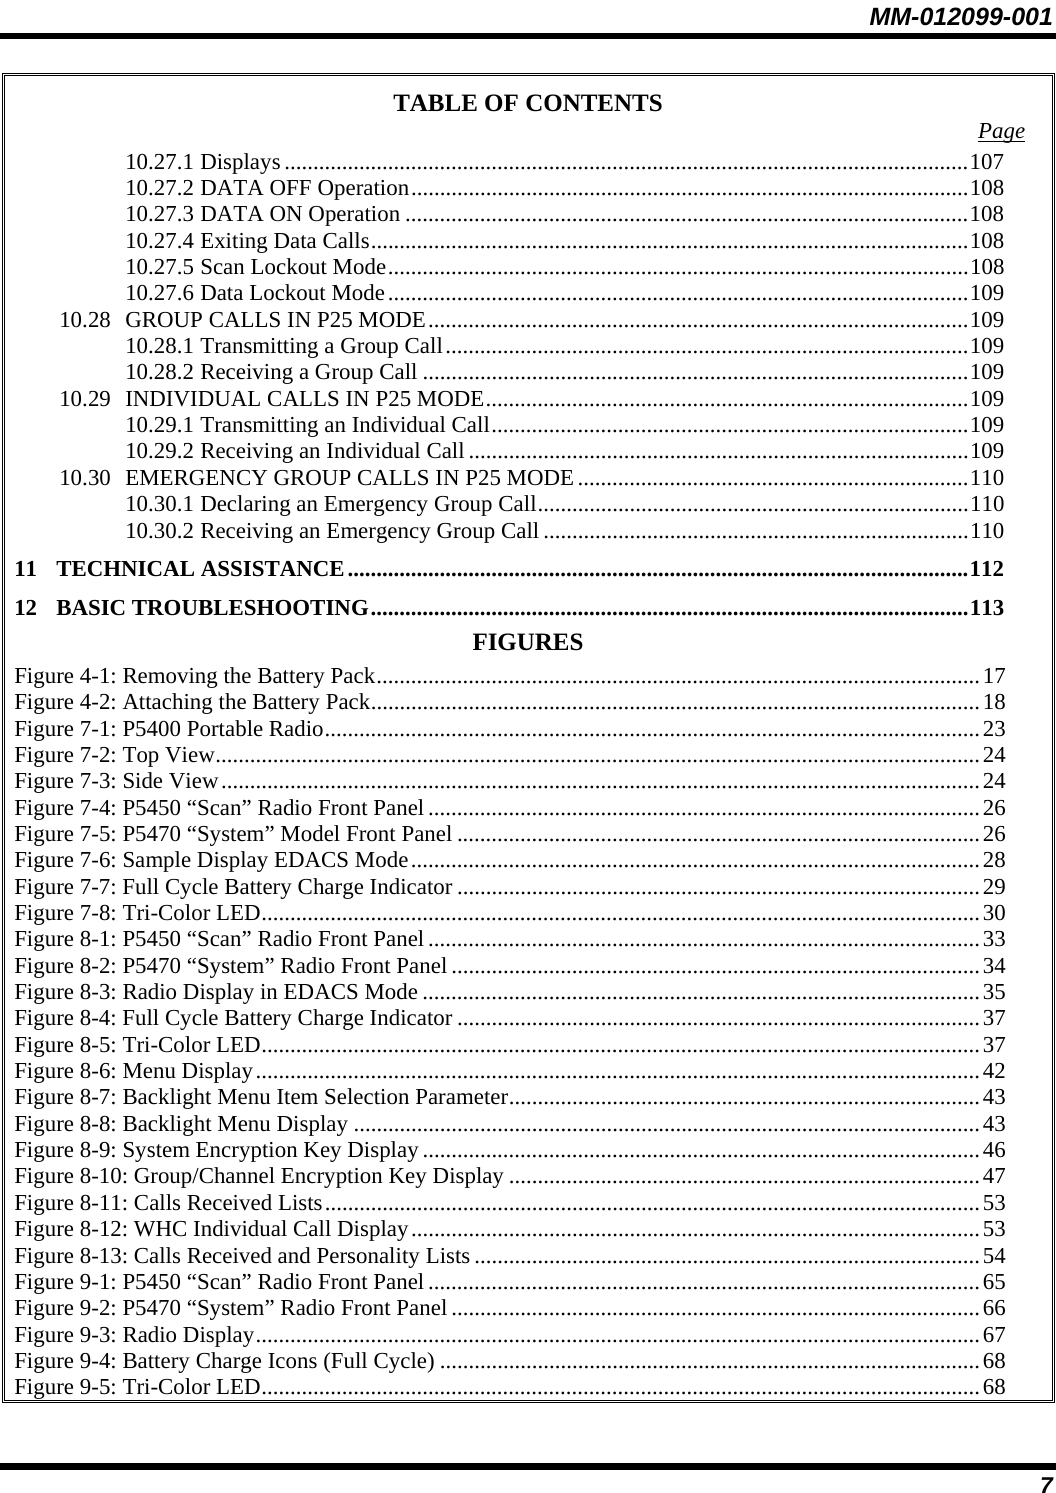 MM-012099-001 7 TABLE OF CONTENTS  Page 10.27.1 Displays .......................................................................................................................107 10.27.2 DATA OFF Operation.................................................................................................108 10.27.3 DATA ON Operation ..................................................................................................108 10.27.4 Exiting Data Calls........................................................................................................108 10.27.5 Scan Lockout Mode.....................................................................................................108 10.27.6 Data Lockout Mode.....................................................................................................109 10.28 GROUP CALLS IN P25 MODE..............................................................................................109 10.28.1 Transmitting a Group Call...........................................................................................109 10.28.2 Receiving a Group Call ...............................................................................................109 10.29 INDIVIDUAL CALLS IN P25 MODE....................................................................................109 10.29.1 Transmitting an Individual Call...................................................................................109 10.29.2 Receiving an Individual Call .......................................................................................109 10.30 EMERGENCY GROUP CALLS IN P25 MODE....................................................................110 10.30.1 Declaring an Emergency Group Call...........................................................................110 10.30.2 Receiving an Emergency Group Call ..........................................................................110 11 TECHNICAL ASSISTANCE............................................................................................................112 12 BASIC TROUBLESHOOTING........................................................................................................113 FIGURES Figure 4-1: Removing the Battery Pack.........................................................................................................17 Figure 4-2: Attaching the Battery Pack..........................................................................................................18 Figure 7-1: P5400 Portable Radio..................................................................................................................23 Figure 7-2: Top View.....................................................................................................................................24 Figure 7-3: Side View....................................................................................................................................24 Figure 7-4: P5450 “Scan” Radio Front Panel................................................................................................26 Figure 7-5: P5470 “System” Model Front Panel ...........................................................................................26 Figure 7-6: Sample Display EDACS Mode...................................................................................................28 Figure 7-7: Full Cycle Battery Charge Indicator ...........................................................................................29 Figure 7-8: Tri-Color LED.............................................................................................................................30 Figure 8-1: P5450 “Scan” Radio Front Panel................................................................................................33 Figure 8-2: P5470 “System” Radio Front Panel ............................................................................................34 Figure 8-3: Radio Display in EDACS Mode .................................................................................................35 Figure 8-4: Full Cycle Battery Charge Indicator ...........................................................................................37 Figure 8-5: Tri-Color LED.............................................................................................................................37 Figure 8-6: Menu Display..............................................................................................................................42 Figure 8-7: Backlight Menu Item Selection Parameter..................................................................................43 Figure 8-8: Backlight Menu Display .............................................................................................................43 Figure 8-9: System Encryption Key Display .................................................................................................46 Figure 8-10: Group/Channel Encryption Key Display ..................................................................................47 Figure 8-11: Calls Received Lists..................................................................................................................53 Figure 8-12: WHC Individual Call Display...................................................................................................53 Figure 8-13: Calls Received and Personality Lists ........................................................................................54 Figure 9-1: P5450 “Scan” Radio Front Panel................................................................................................65 Figure 9-2: P5470 “System” Radio Front Panel ............................................................................................66 Figure 9-3: Radio Display..............................................................................................................................67 Figure 9-4: Battery Charge Icons (Full Cycle) ..............................................................................................68 Figure 9-5: Tri-Color LED.............................................................................................................................68 